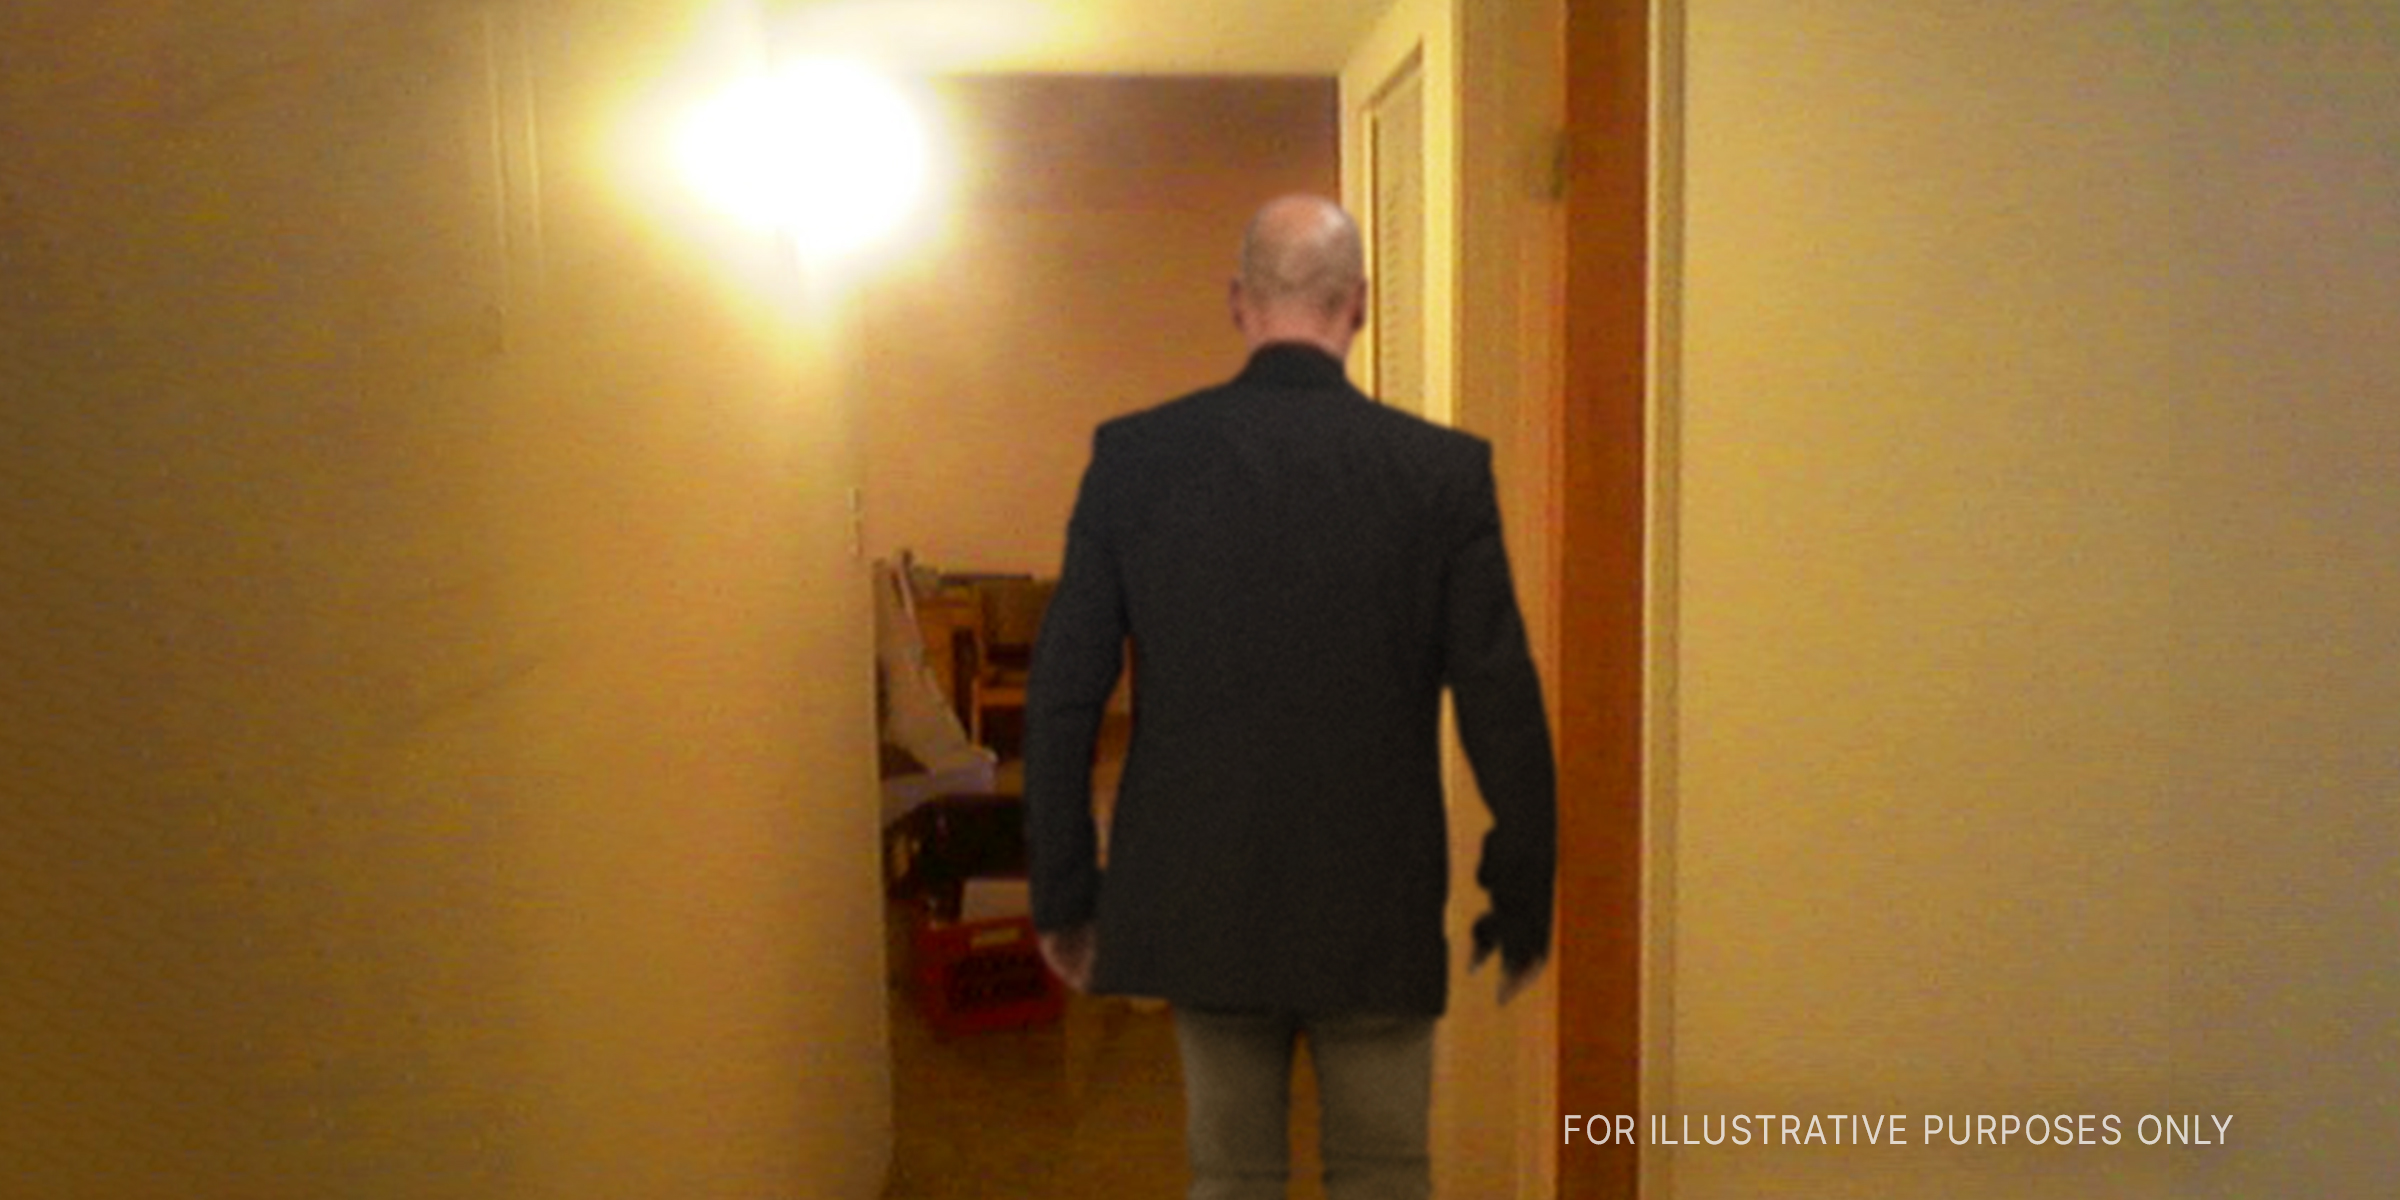 Man entering a room | Source: Shutterstock | Flickr/kurmbox (CC BY-SA 2.0)